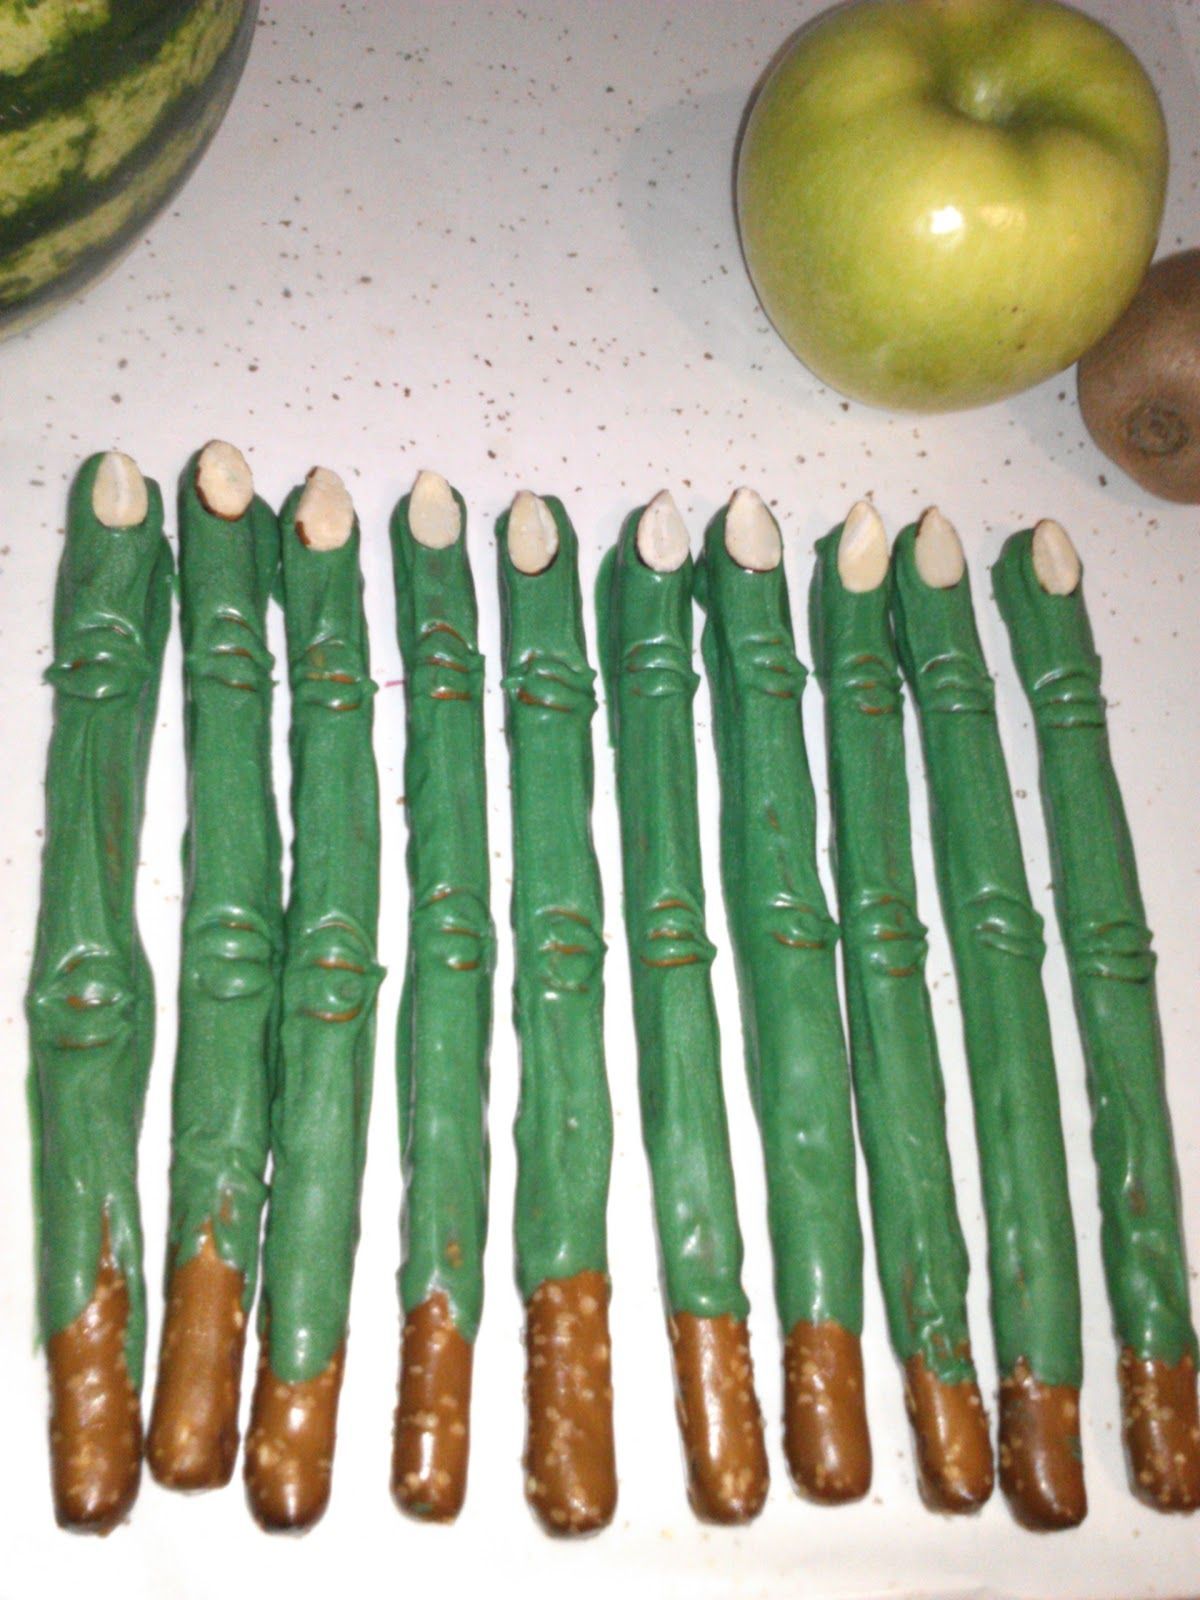 “Zombie Fingers” are actually pretzel rods covered in white chocolate. This is another borro